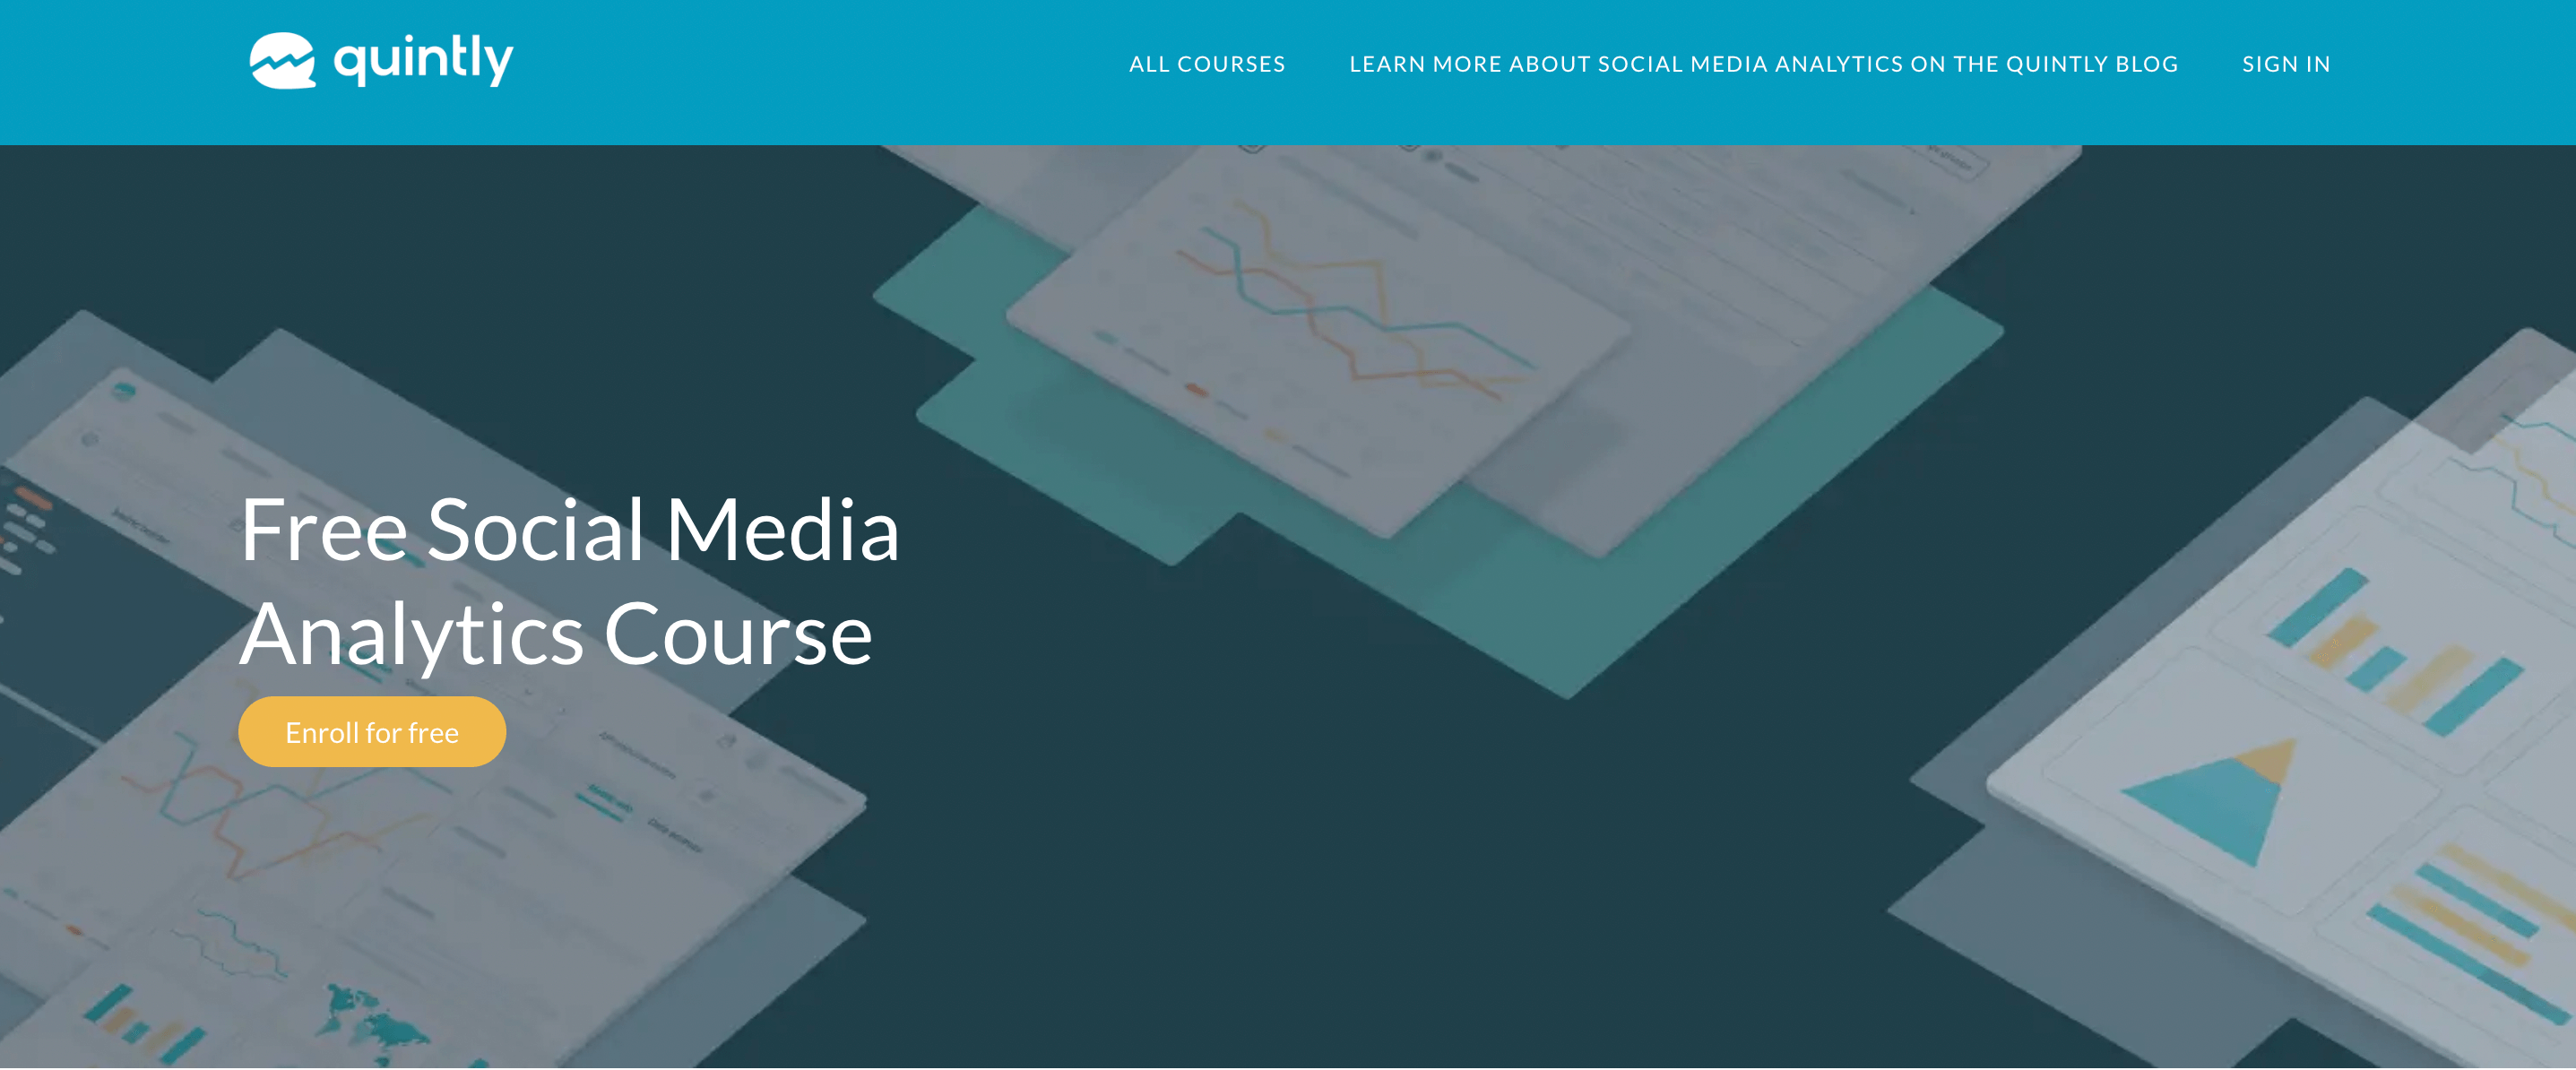 Homepage of Quintly's Analytics Course